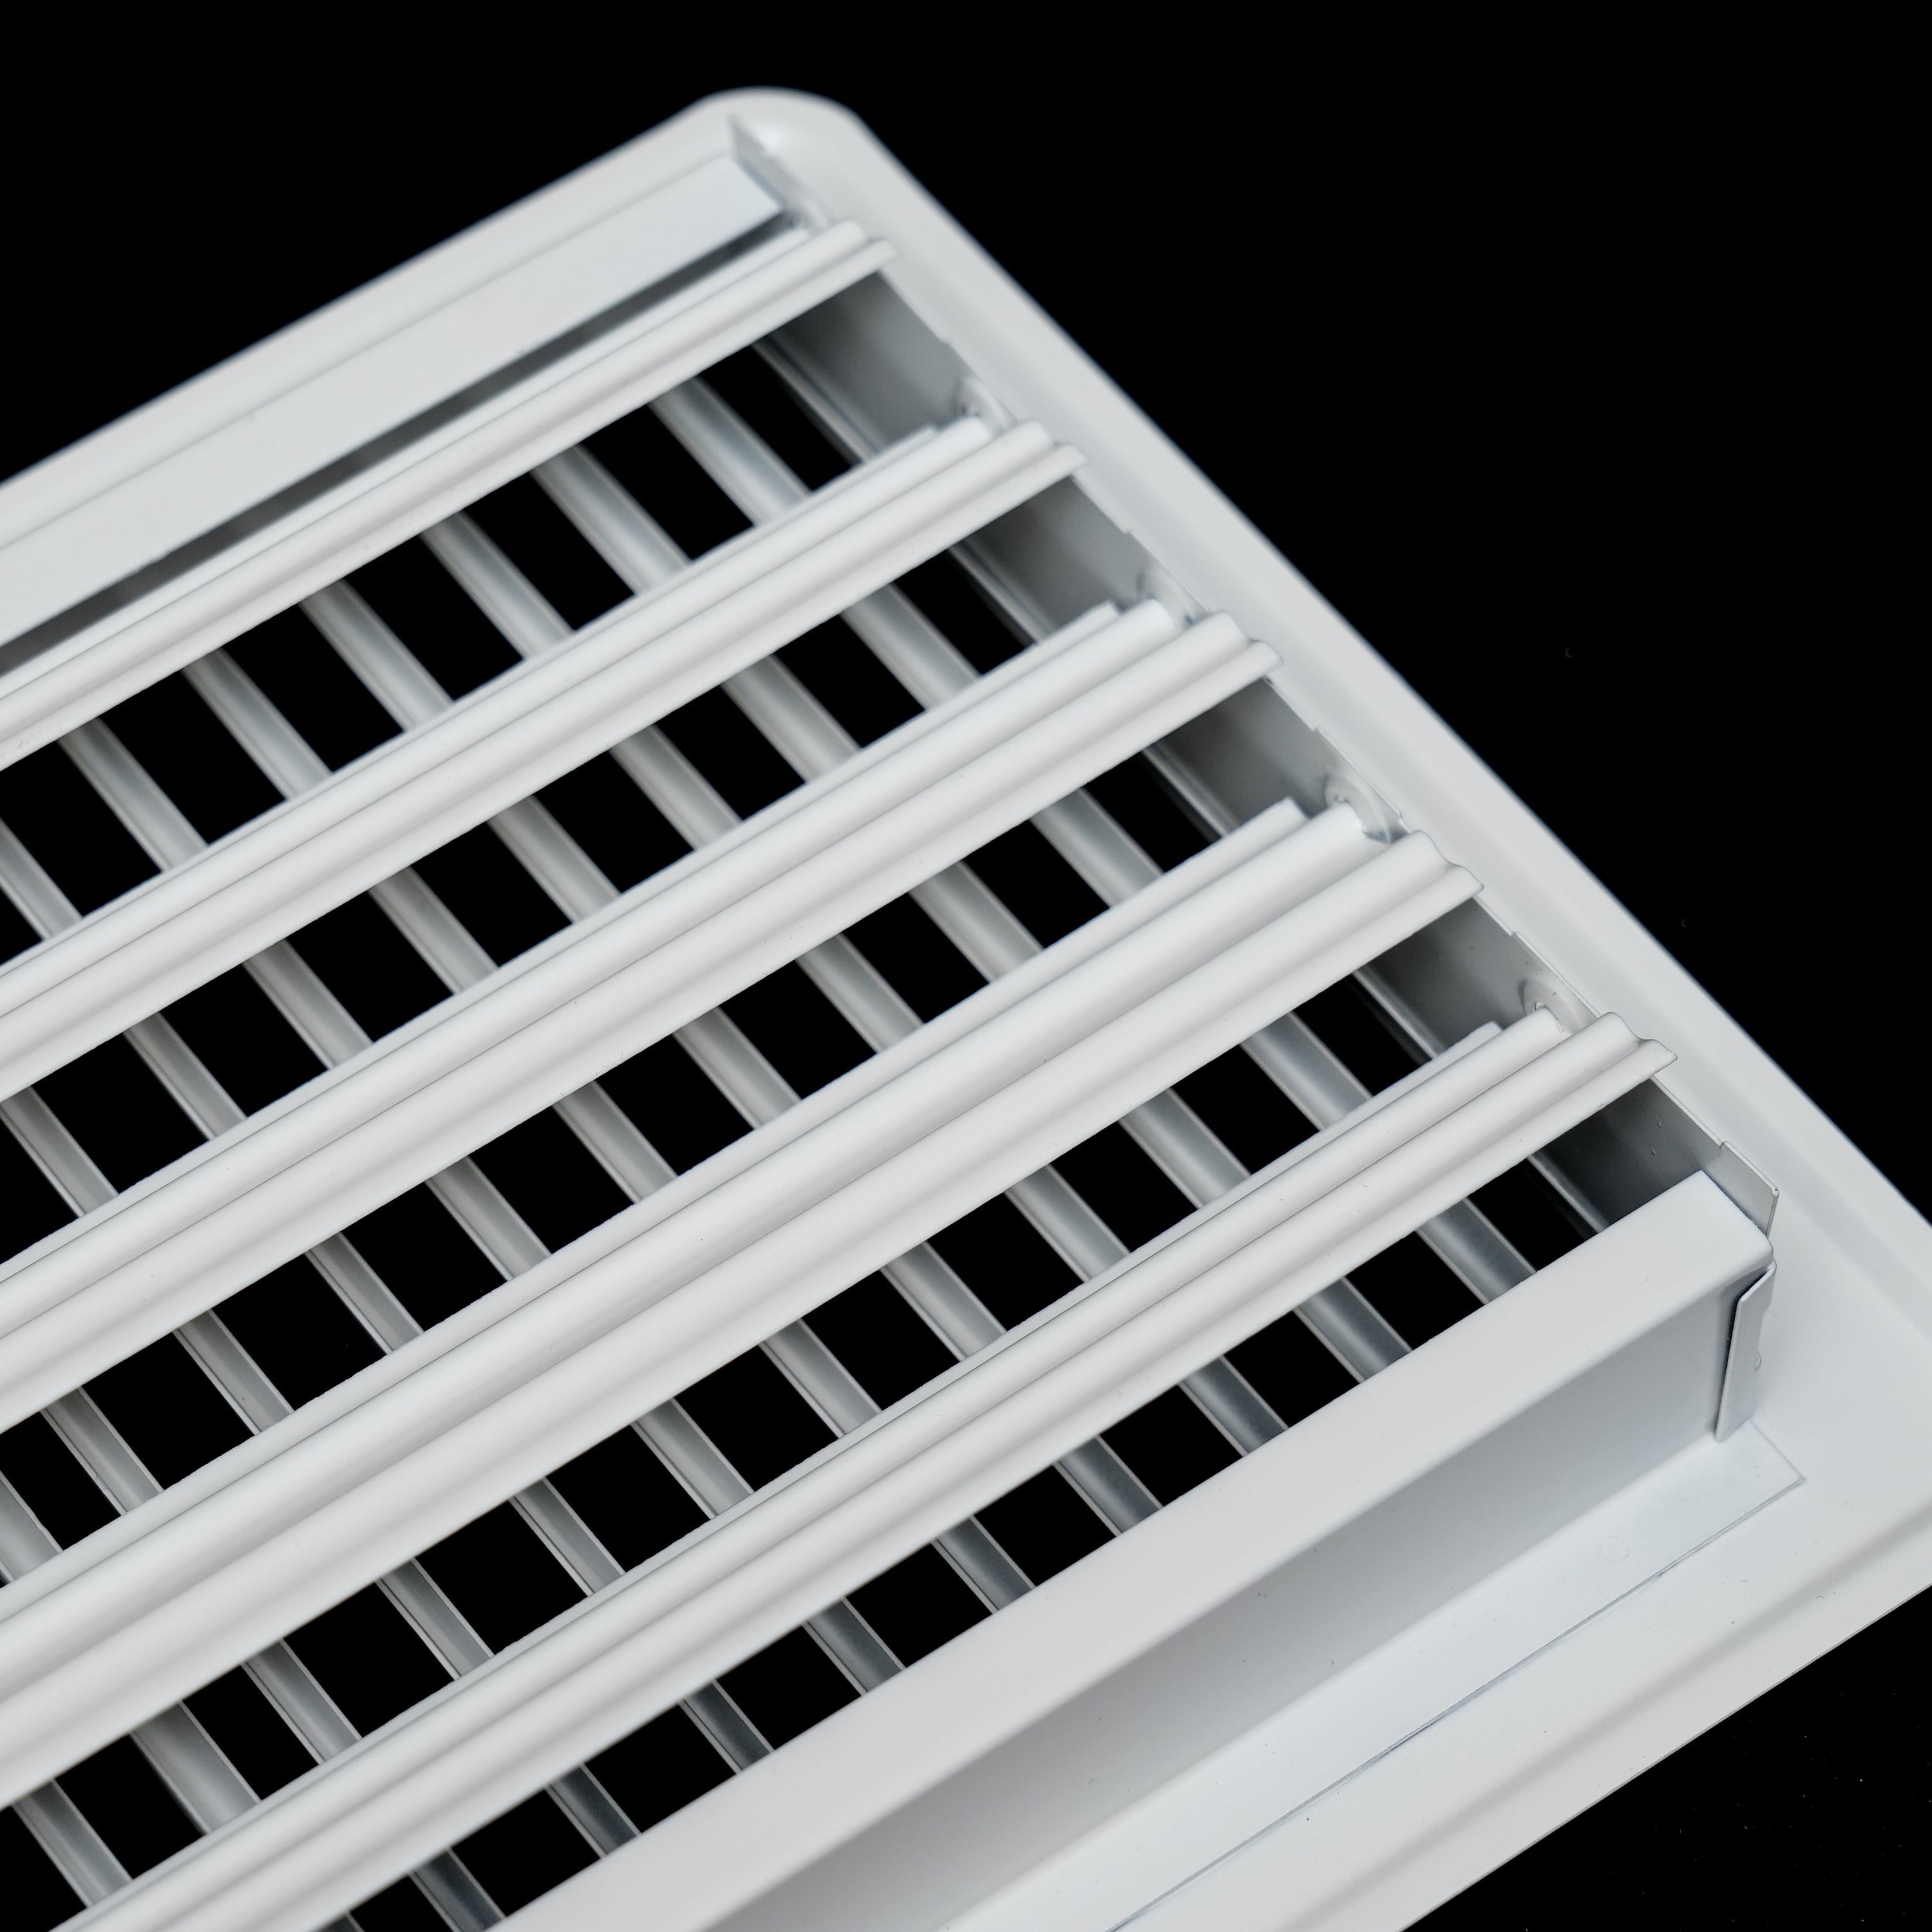 6" x 10"  Floor Register with Louvered Design | Heavy Duty Walkable Design with Damper | Floor Vent Grille | Easy to Adjust Air Supply lever | White